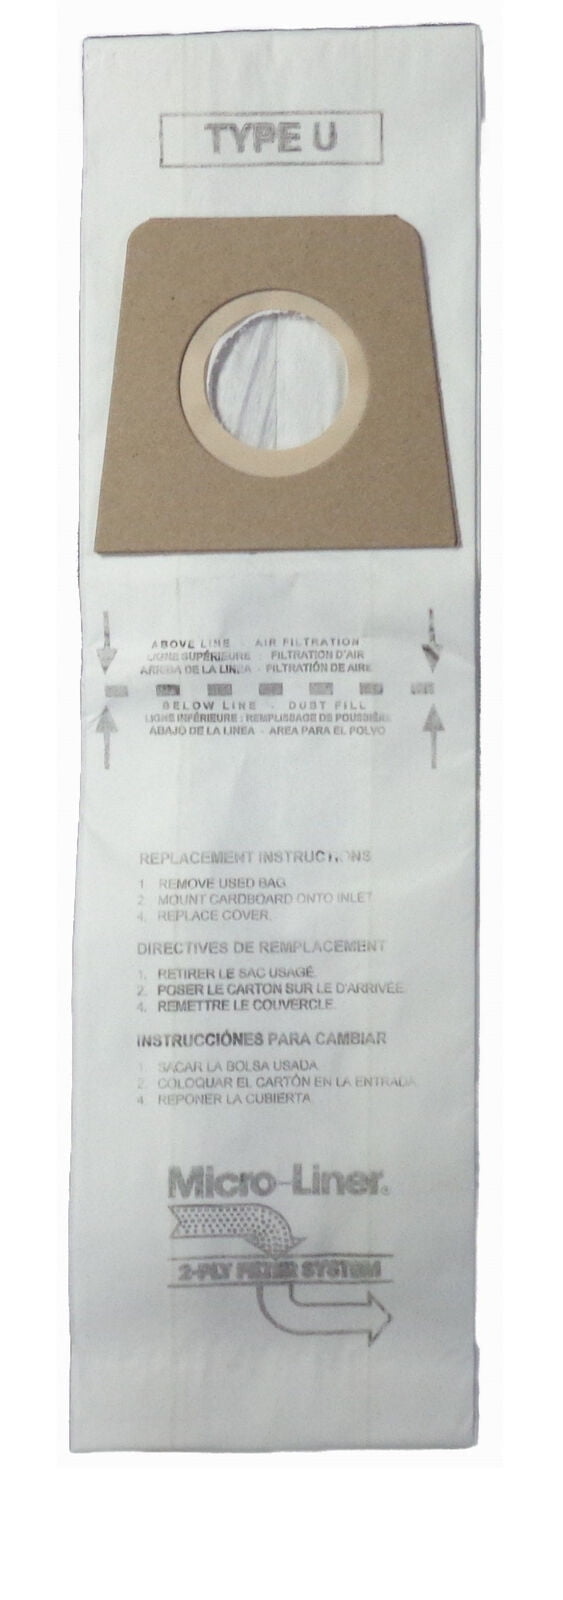 DVC [12 Bags] Royal Dirt Devil Type U Micro Allergen Vacuum Cleaner Bags by DVC Made in USA